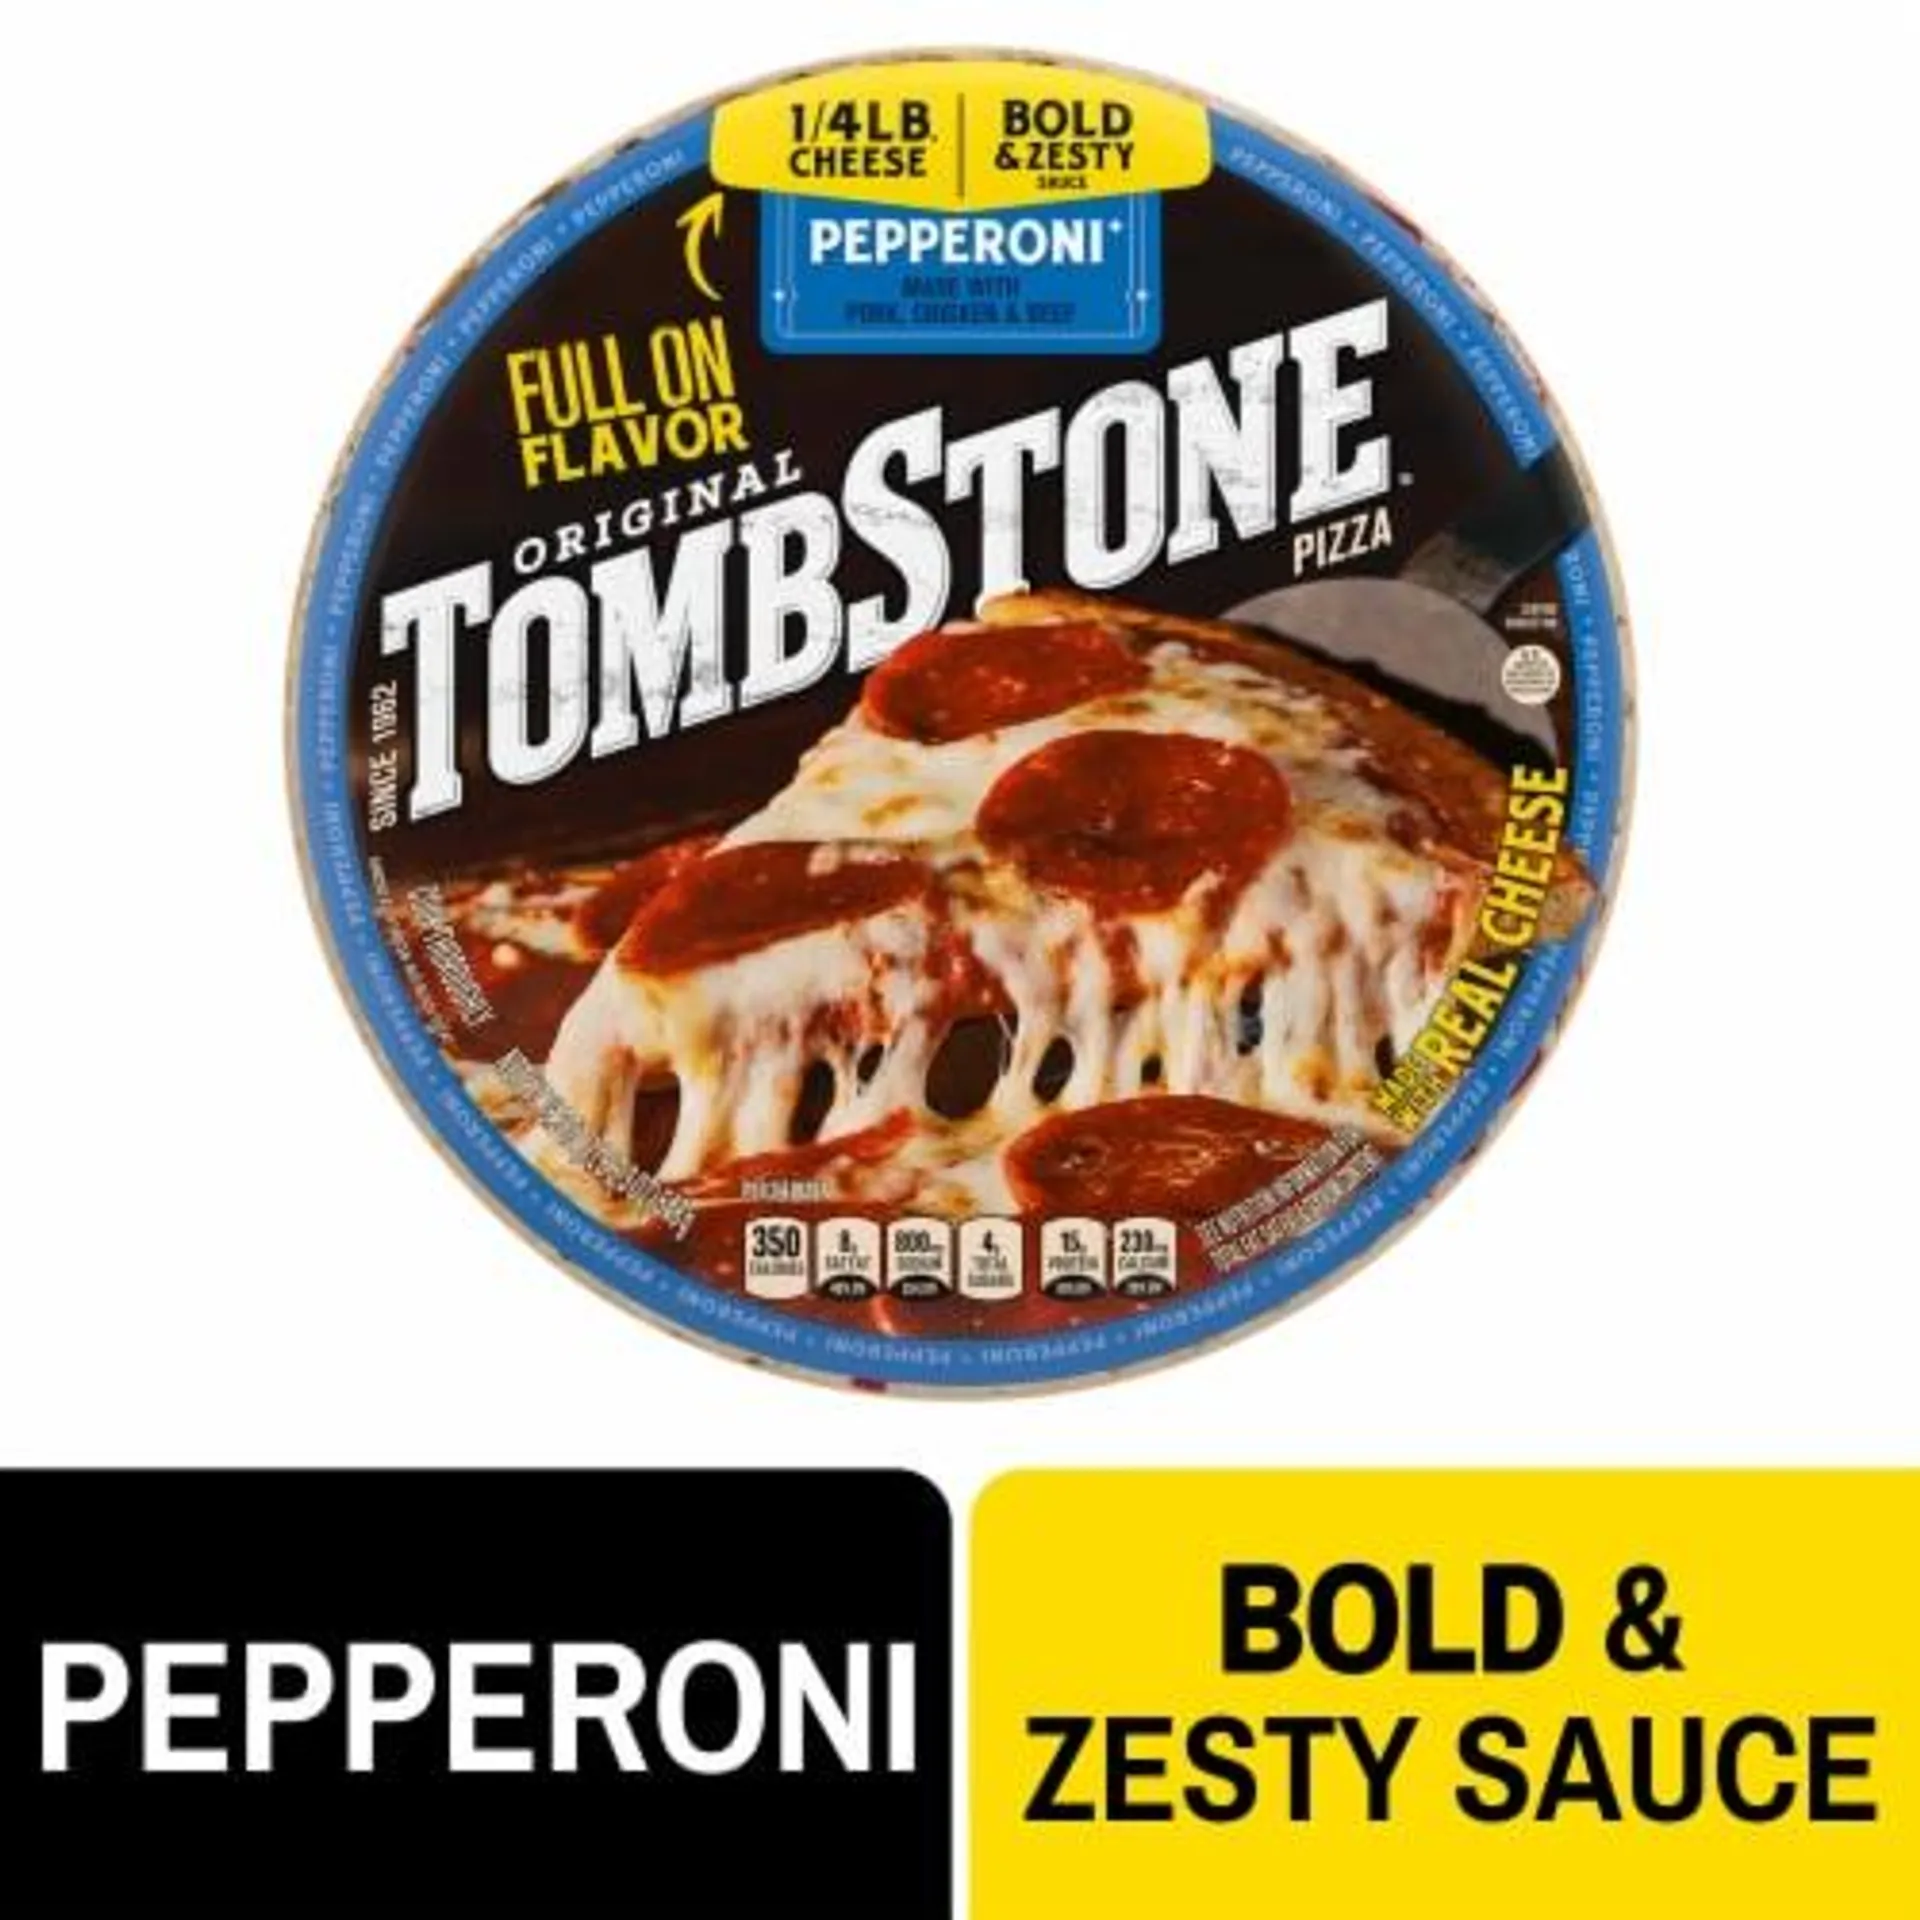 Tombstone Pepperoni Frozen Pizza